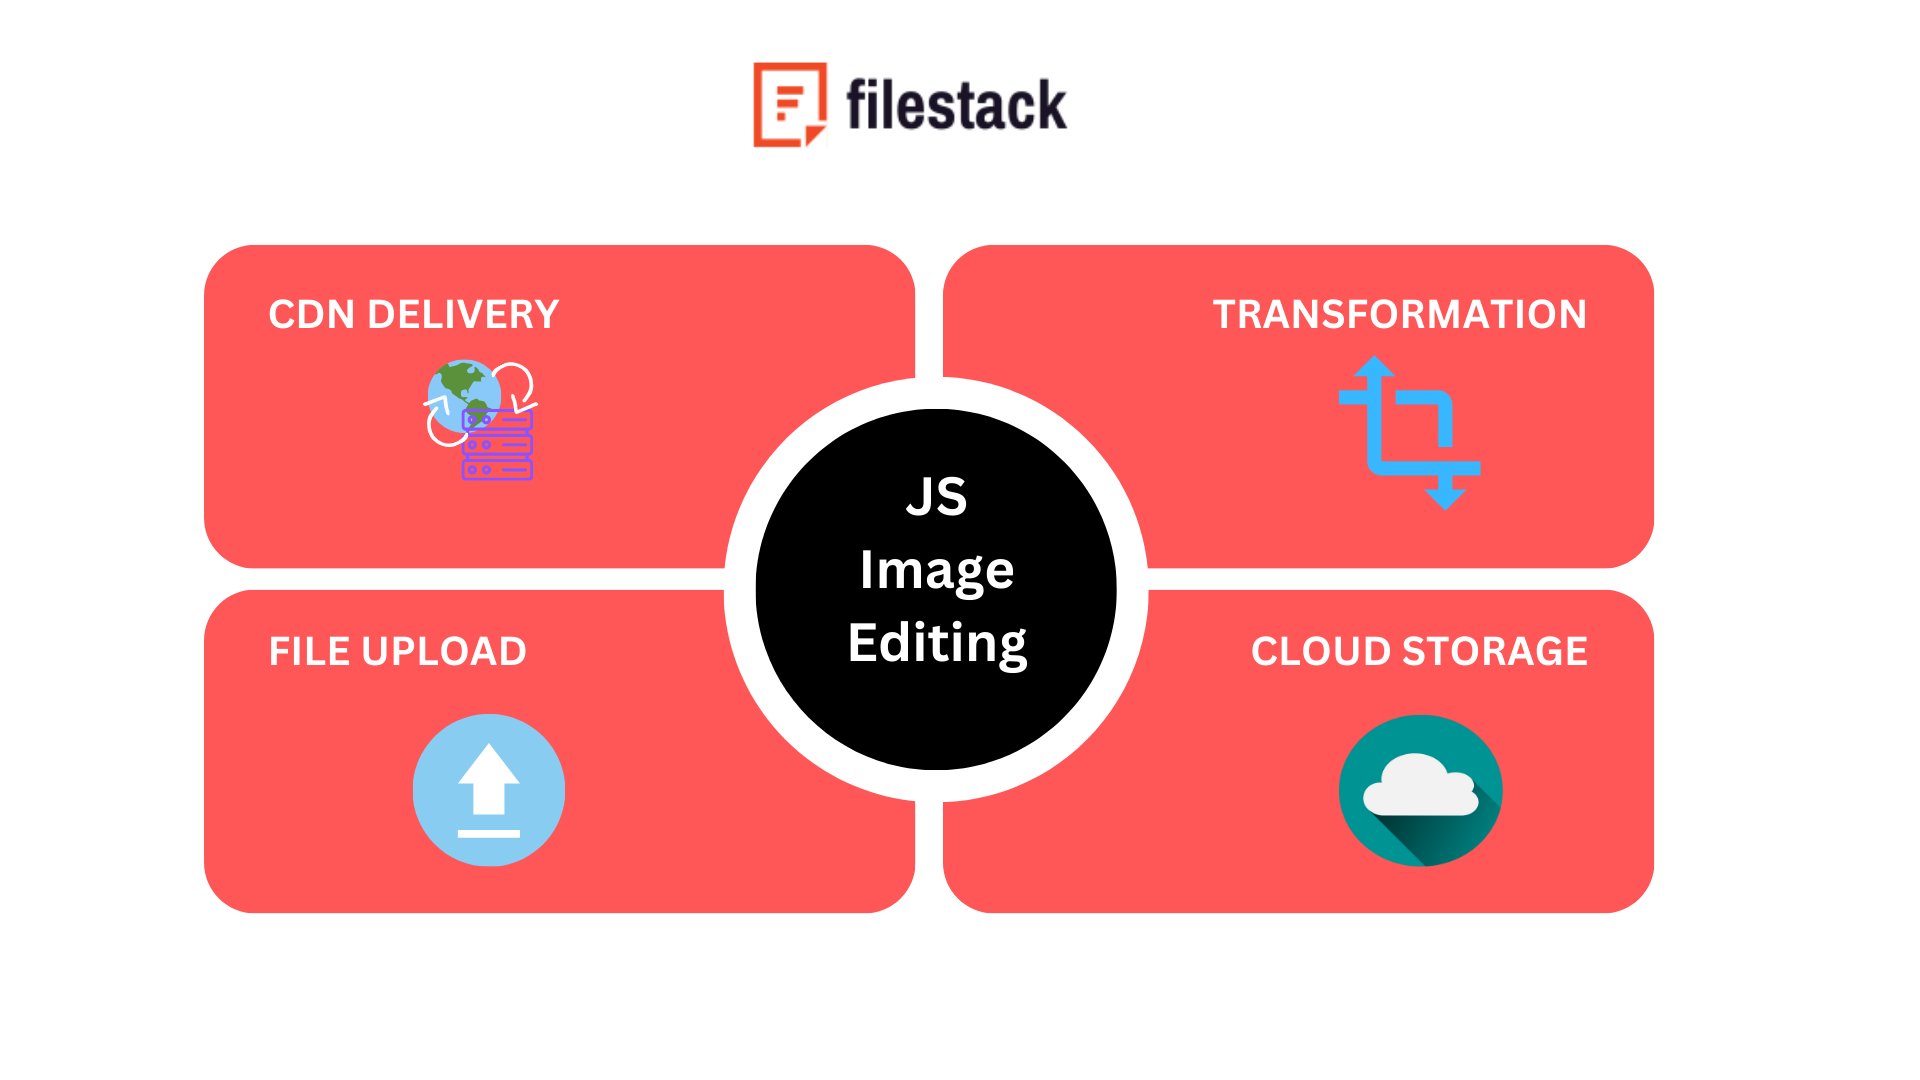 How can Filestack help you with JavaScript image editing?